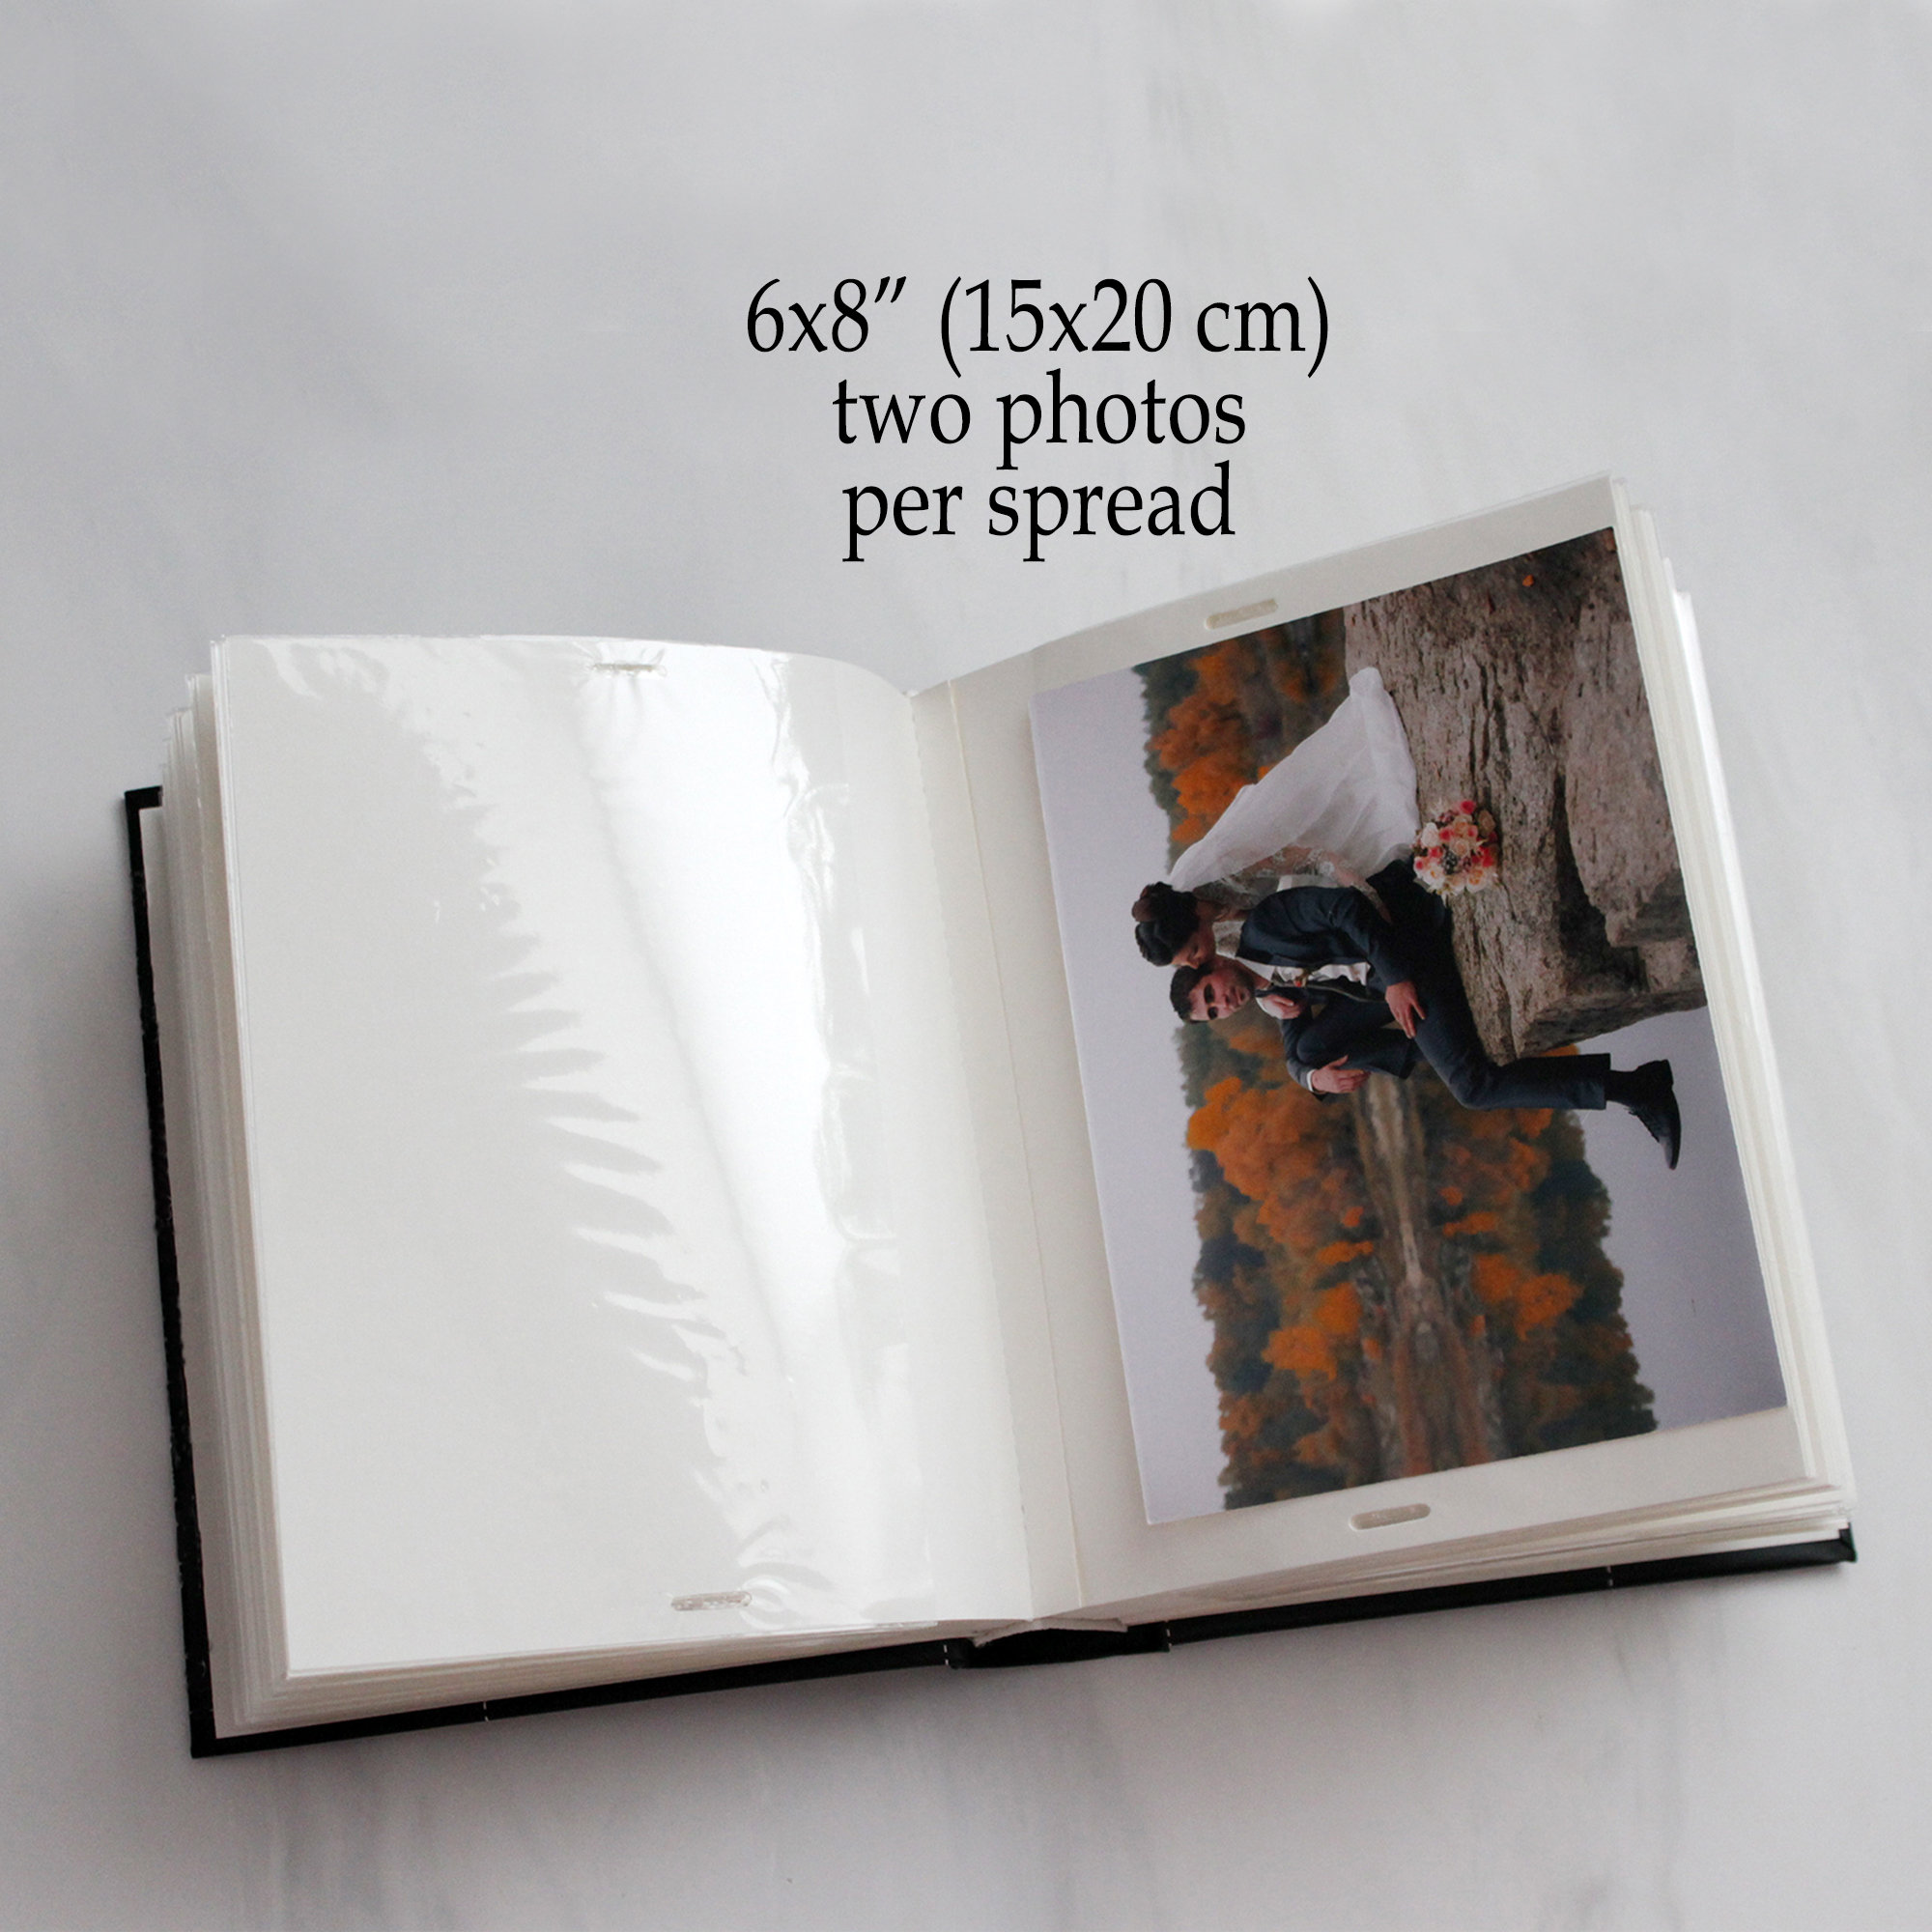 Personalized 4x6 Photo Album for 100 4x6 Photos. Album With Sleeves. Pocket  Photo Album for 10x15 Cm Photos. Personalized Christmas Gift 